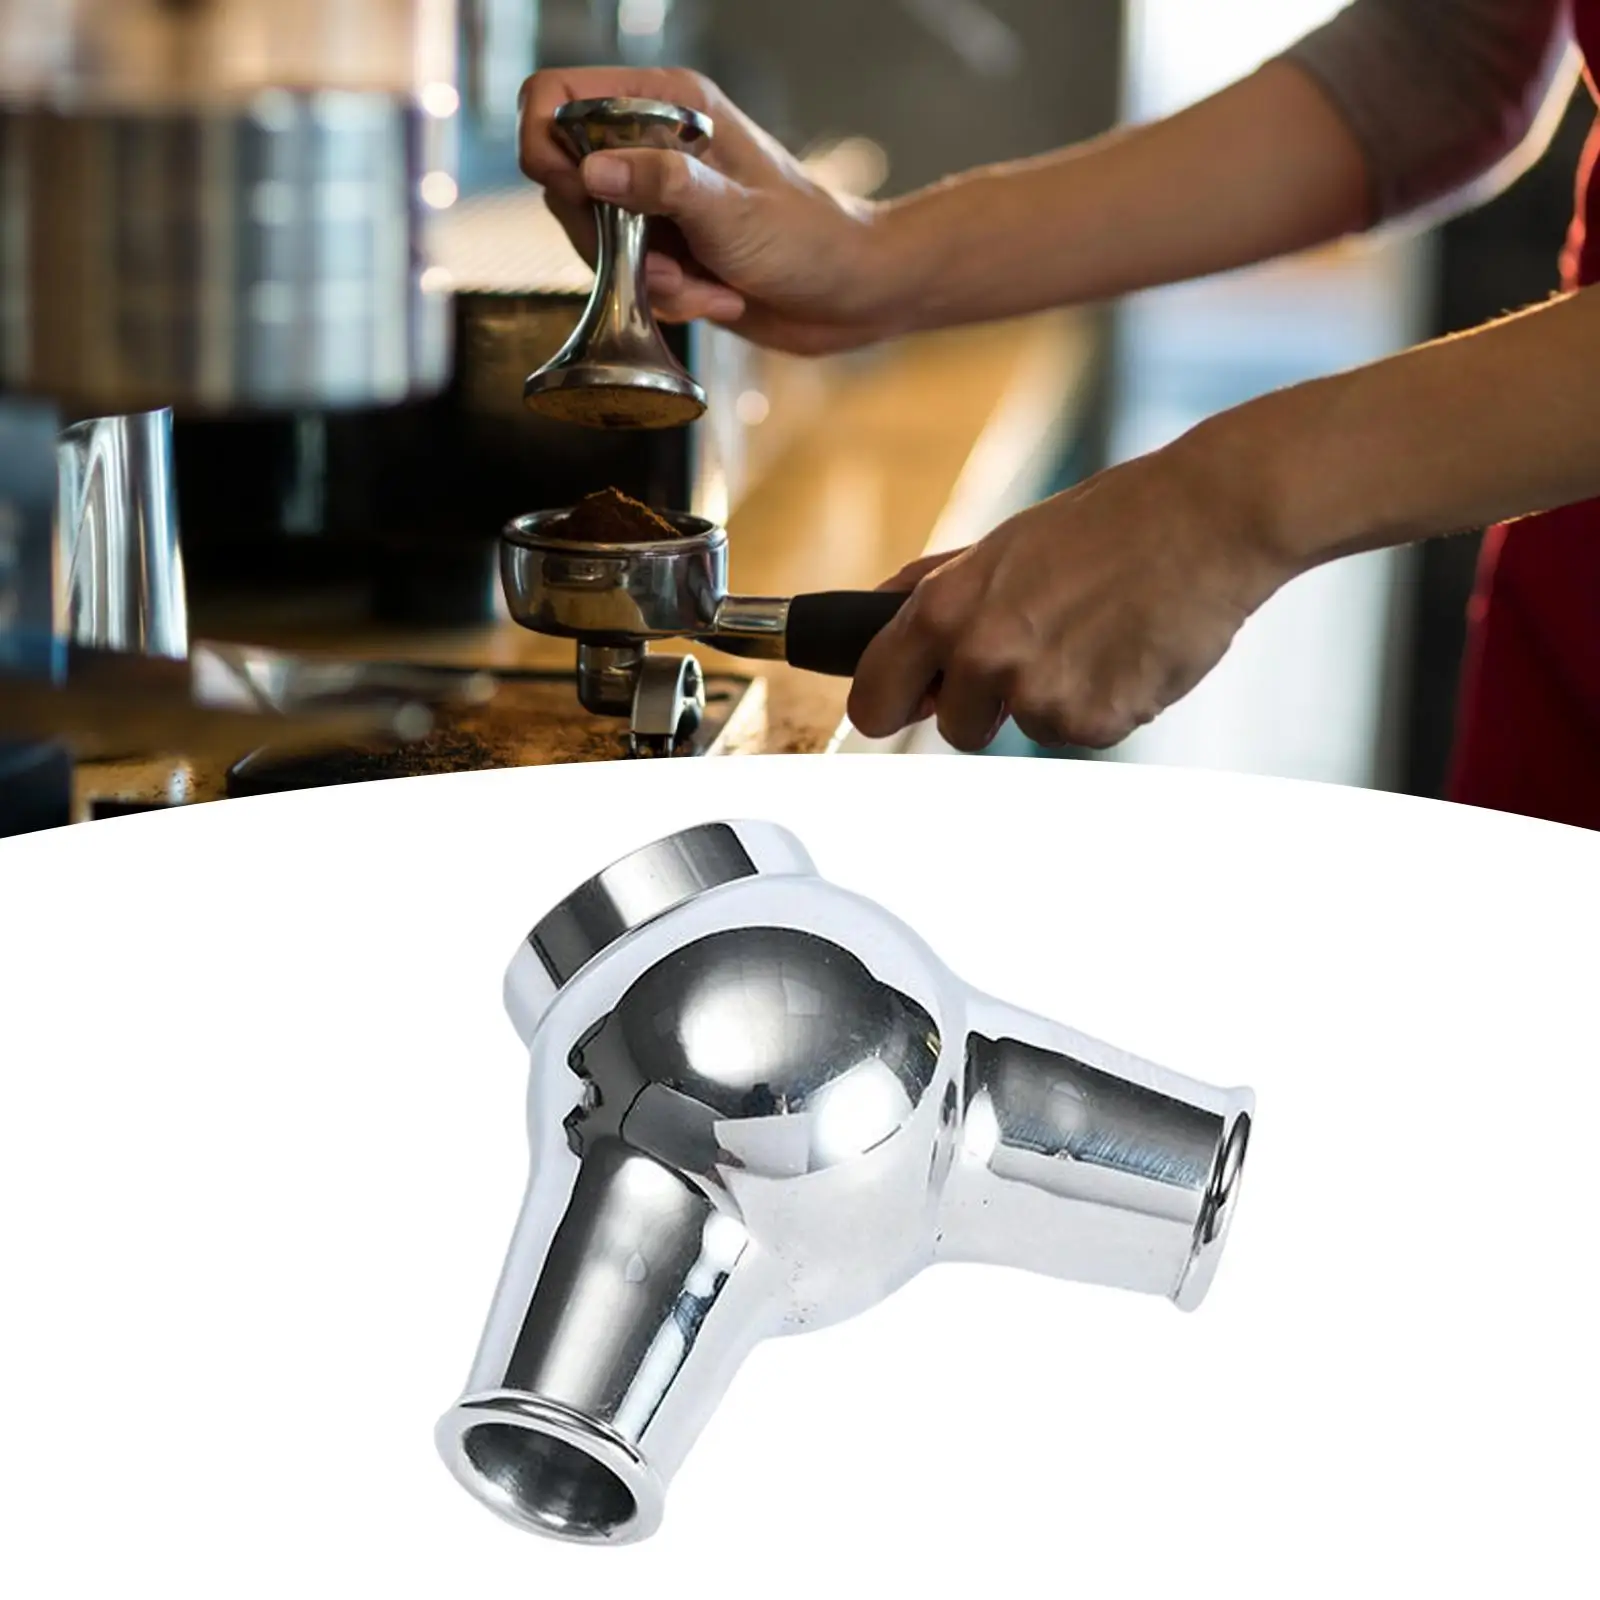 Stainless Steel Coffee Machine Maker Nozzle Double Nozzle Replacements Coffee Maker Nozzle Parts Accessory Leakage Durable